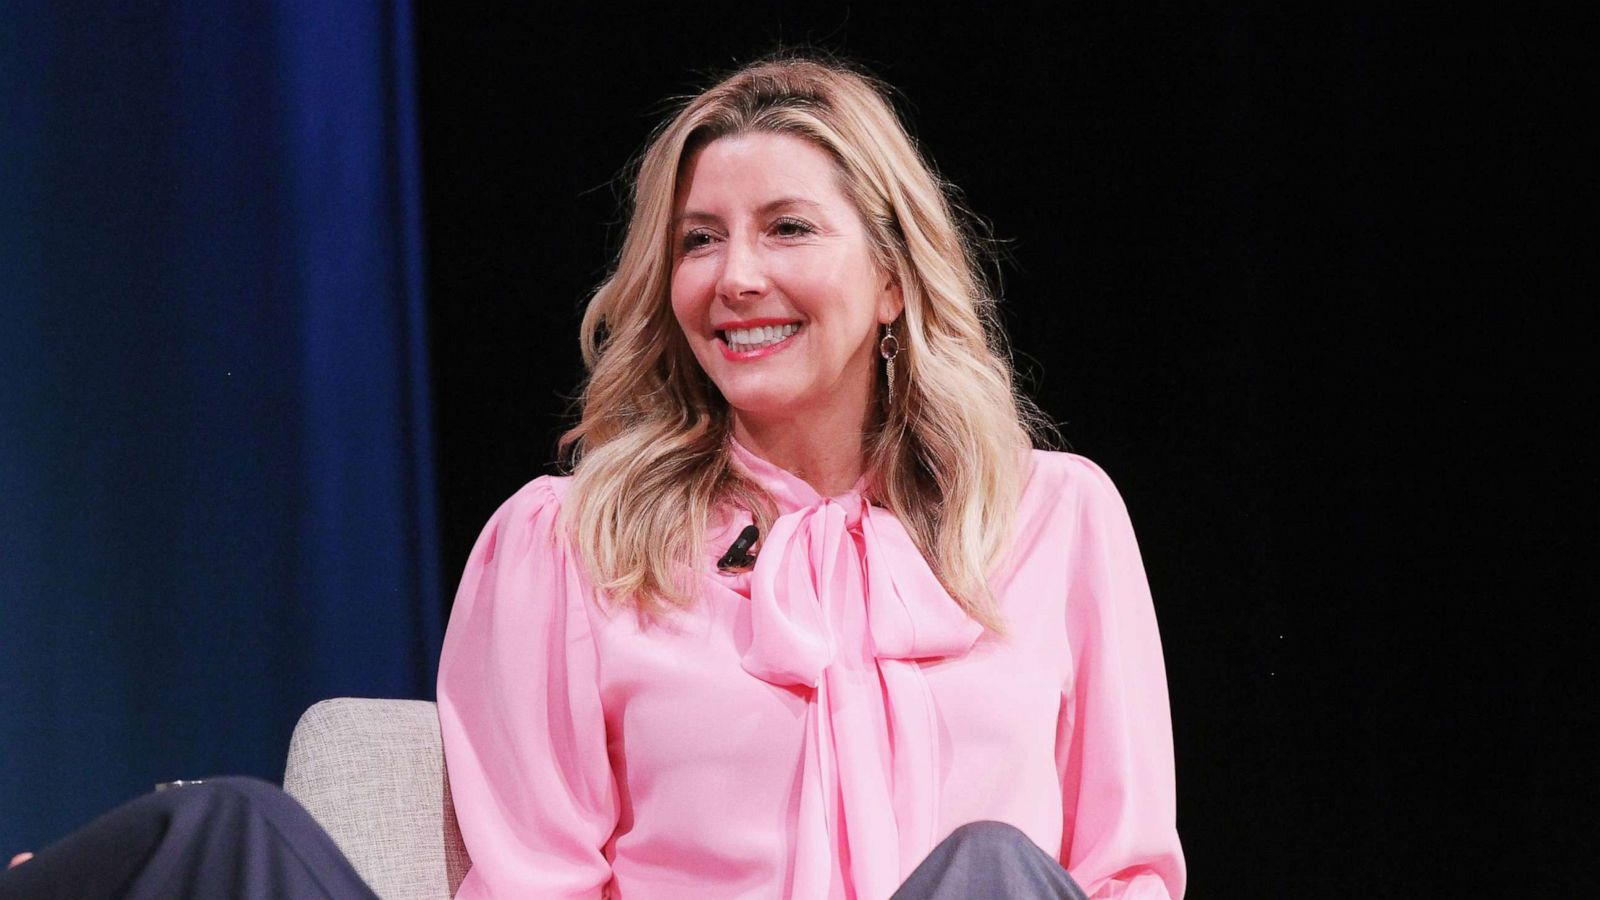 Sara Blakely Worked at Disney World, Sold Fax Machines, and Did